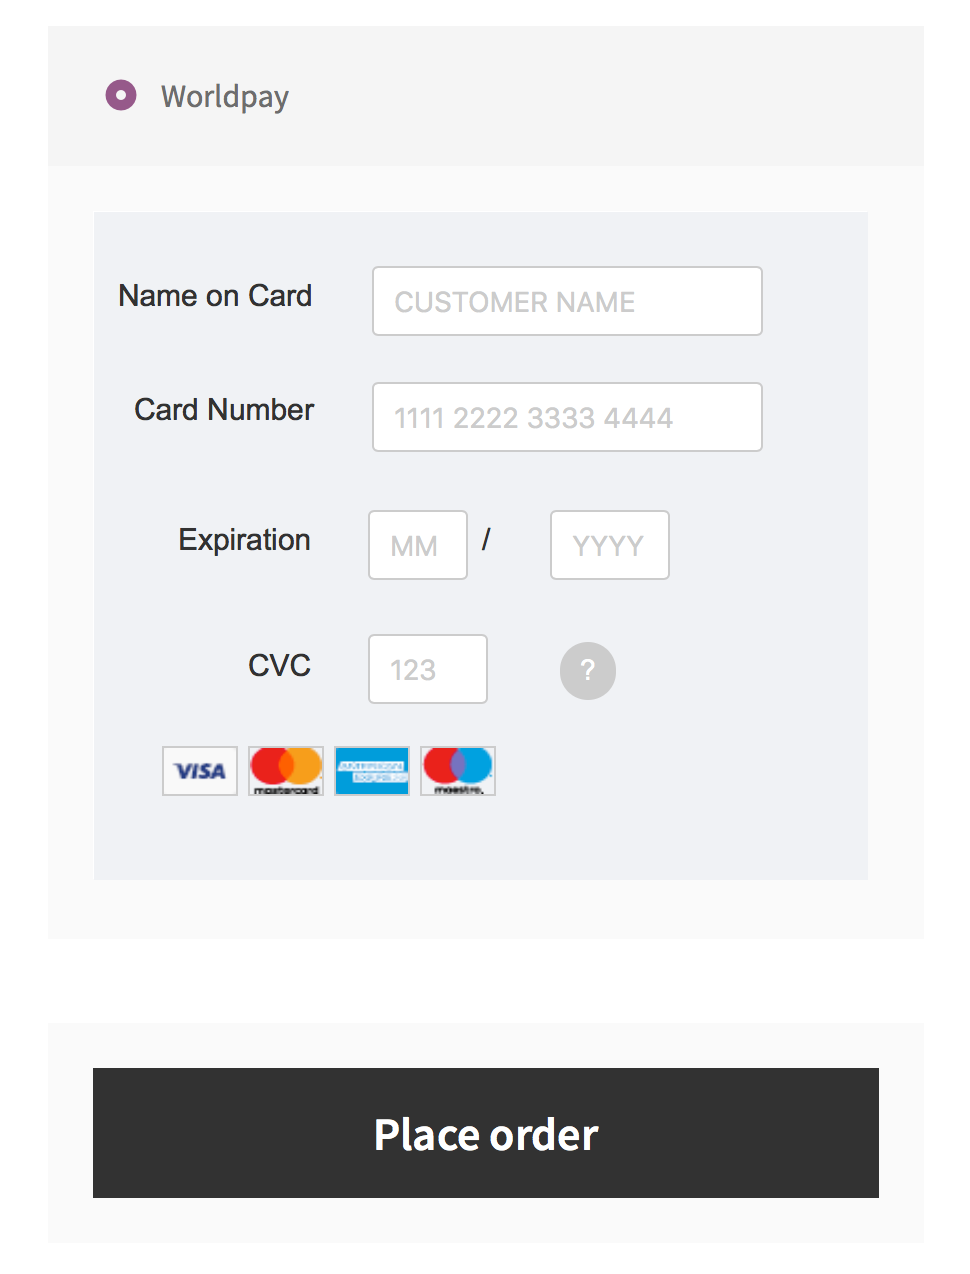 WooCommerce checkout form for Worldpay Online